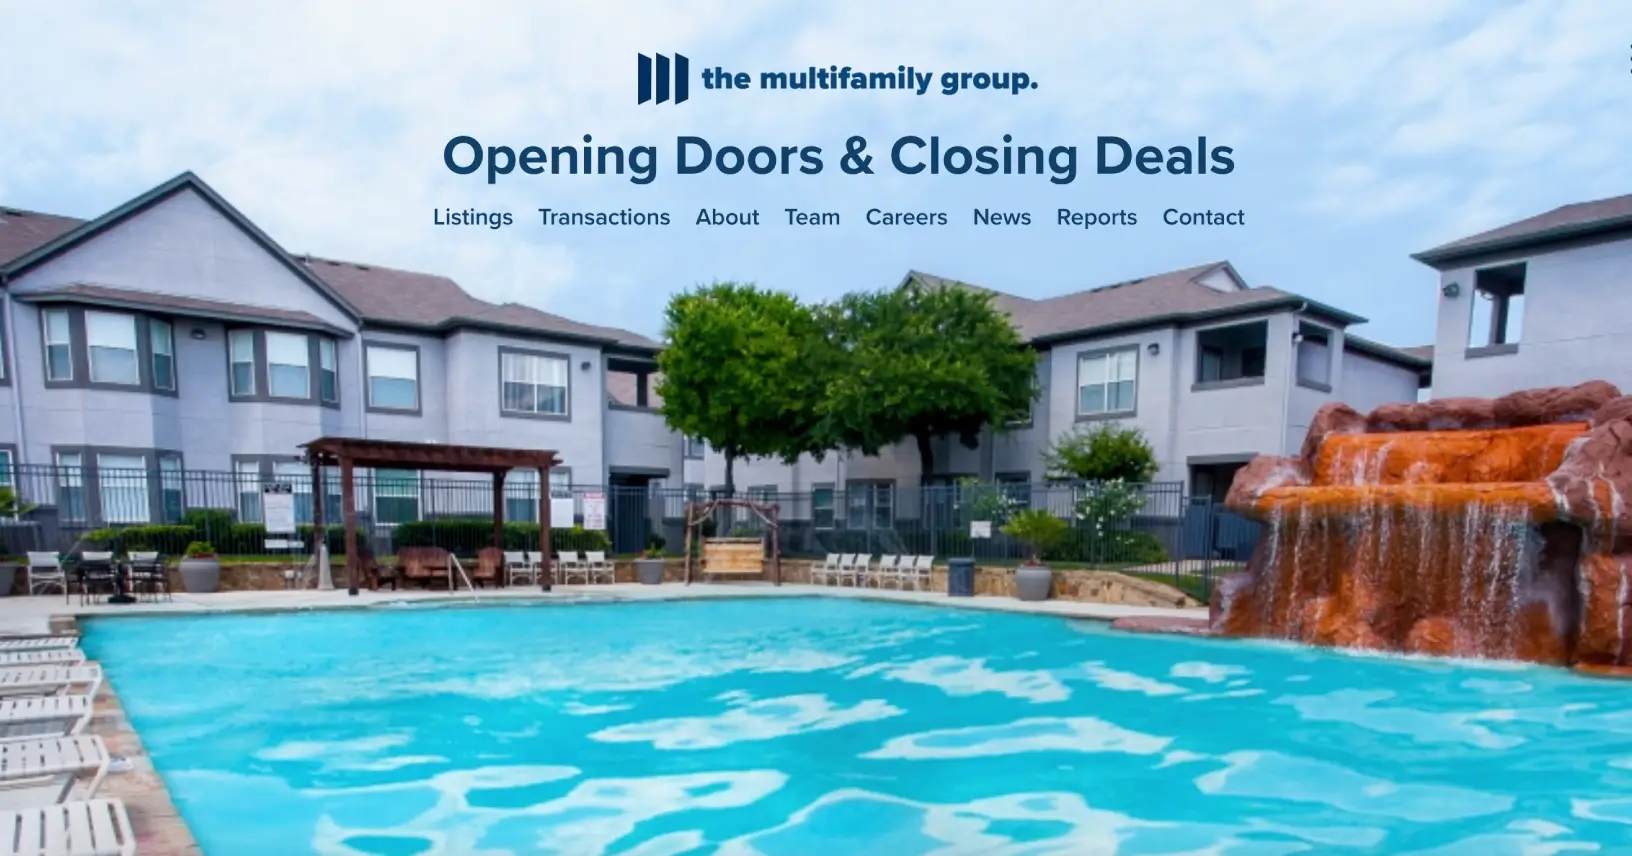 The Multifamily Group